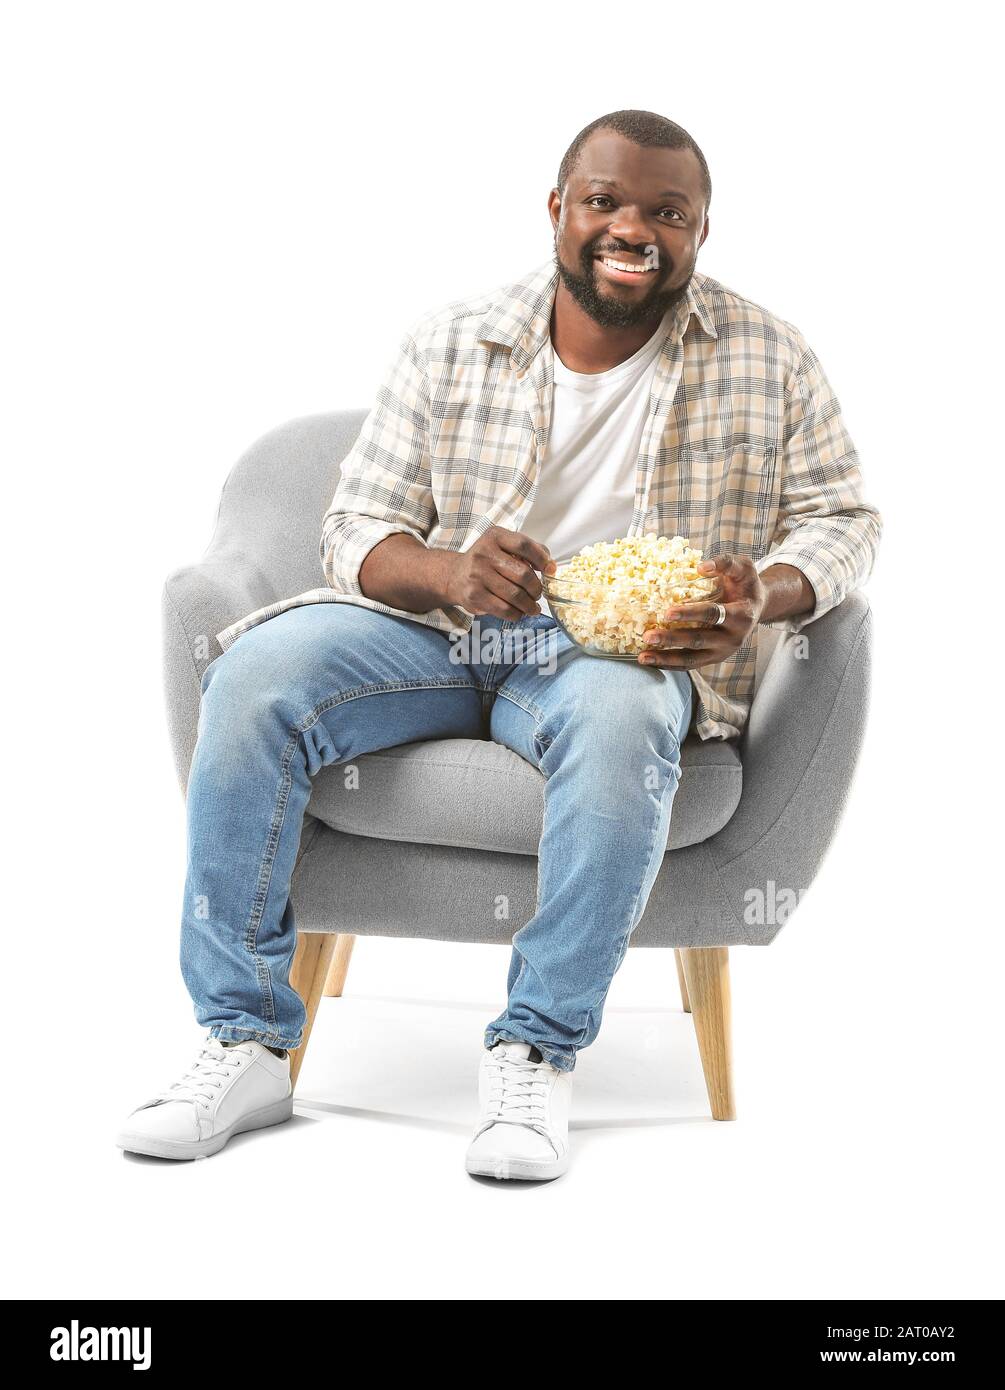 African-American man with popcorn watching TV while sitting in armchair  against white background Stock Photo - Alamy